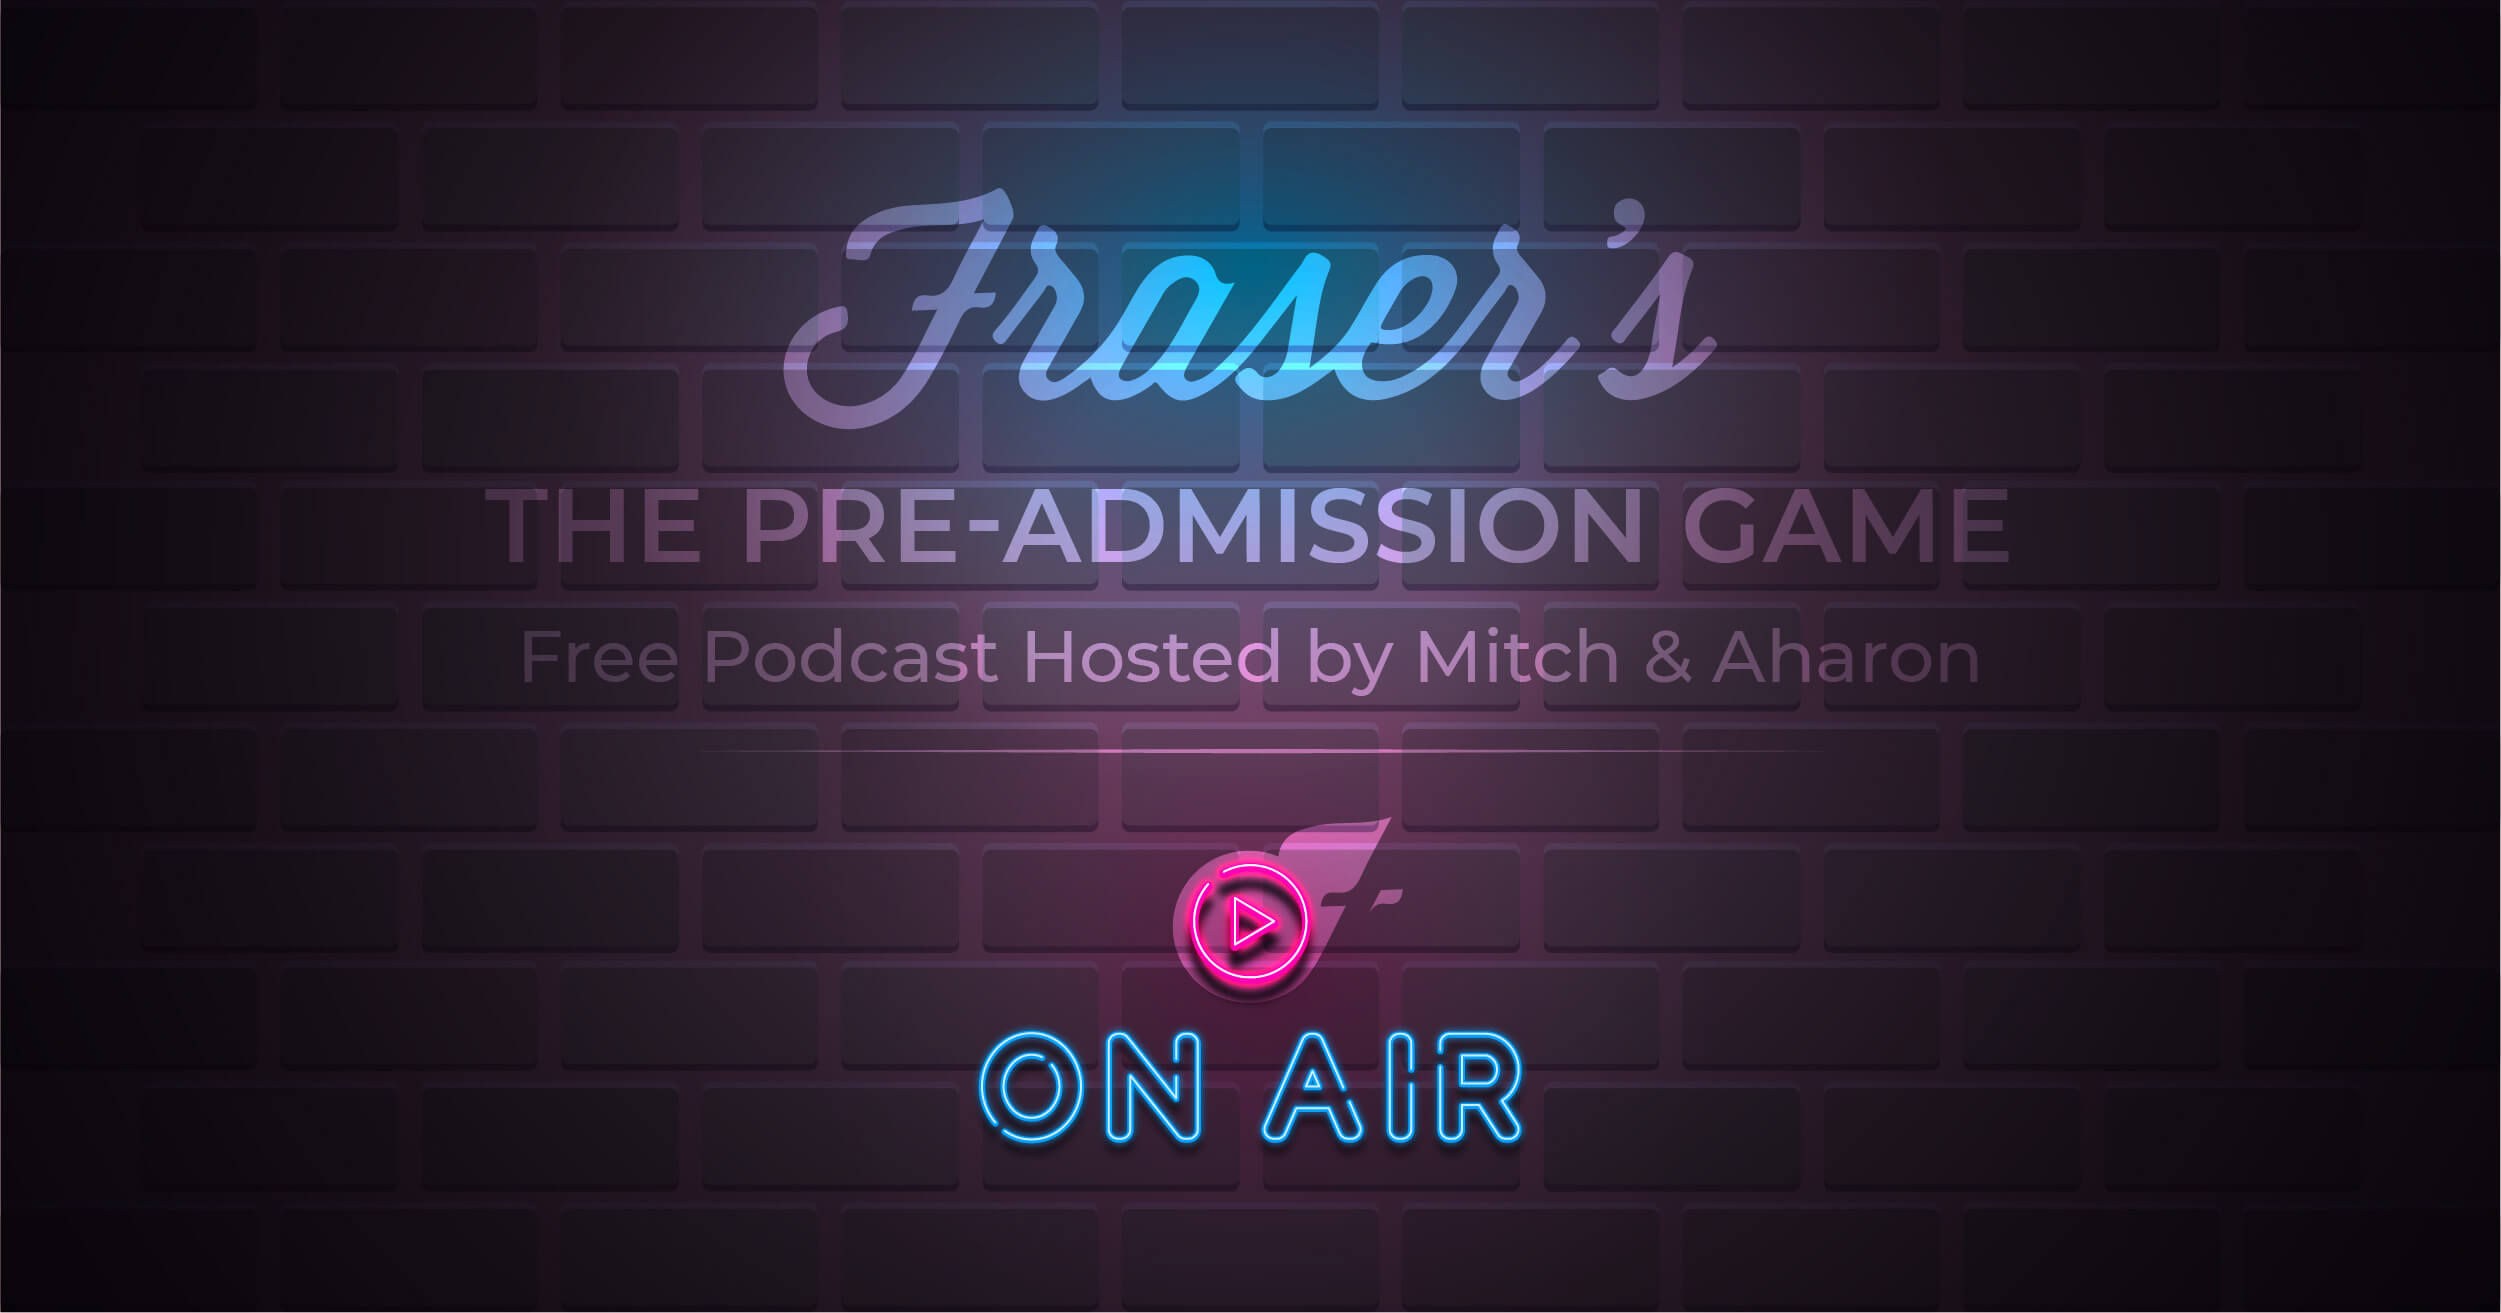 Frasers's pre admission game podcast (Social Determinants of Health)